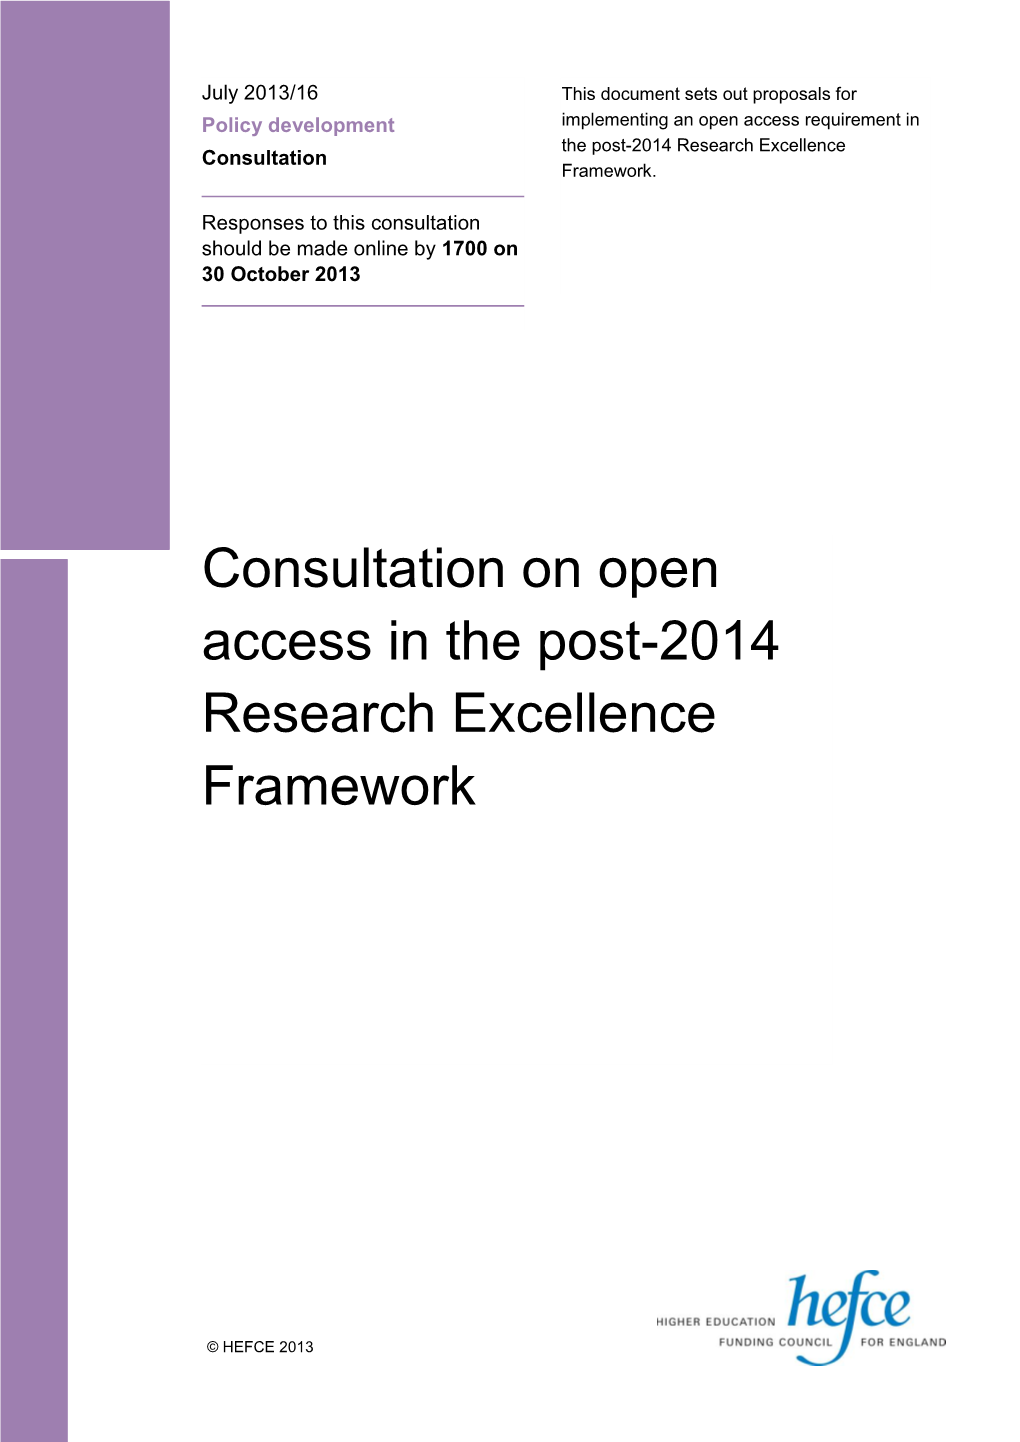 RGS-IBG Response to Open Access Post REF2014